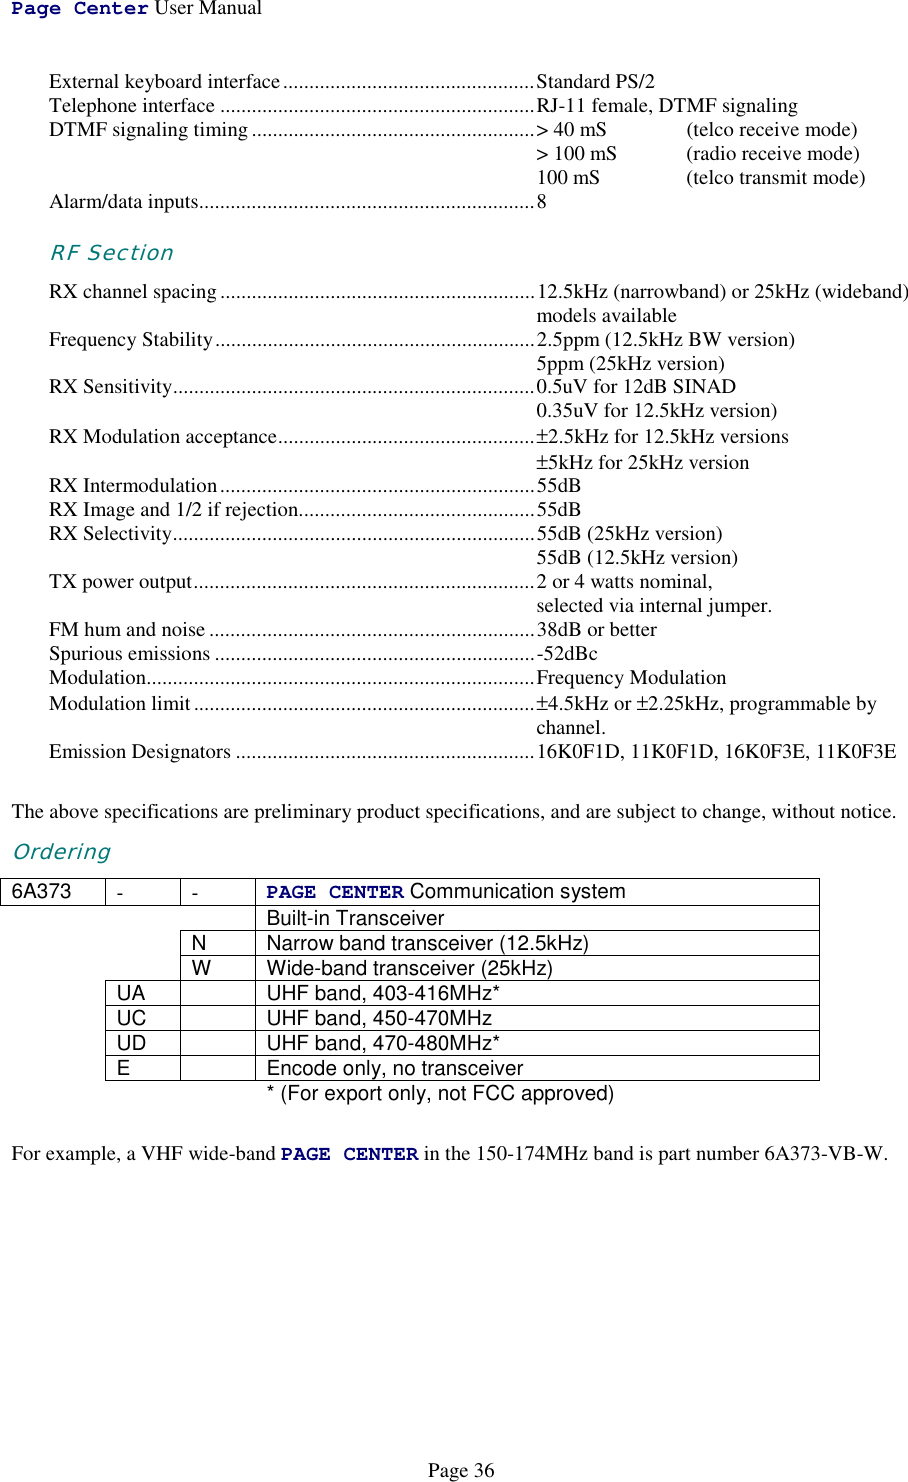 Page Center User ManualPage 36External keyboard interface................................................Standard PS/2Telephone interface ............................................................RJ-11 female, DTMF signalingDTMF signaling timing......................................................&gt; 40 mS  (telco receive mode)&gt; 100 mS  (radio receive mode)100 mS (telco transmit mode)Alarm/data inputs................................................................8RF SectionRX channel spacing............................................................12.5kHz (narrowband) or 25kHz (wideband)models availableFrequency Stability.............................................................2.5ppm (12.5kHz BW version)5ppm (25kHz version)RX Sensitivity.....................................................................0.5uV for 12dB SINAD0.35uV for 12.5kHz version)RX Modulation acceptance.................................................±2.5kHz for 12.5kHz versions±5kHz for 25kHz versionRX Intermodulation............................................................55dBRX Image and 1/2 if rejection.............................................55dBRX Selectivity.....................................................................55dB (25kHz version)55dB (12.5kHz version)TX power output.................................................................2 or 4 watts nominal,selected via internal jumper.FM hum and noise ..............................................................38dB or betterSpurious emissions .............................................................-52dBcModulation..........................................................................Frequency ModulationModulation limit.................................................................±4.5kHz or ±2.25kHz, programmable bychannel.Emission Designators .........................................................16K0F1D, 11K0F1D, 16K0F3E, 11K0F3EThe above specifications are preliminary product specifications, and are subject to change, without notice.Ordering6A373 --PAGE CENTER Communication systemBuilt-in TransceiverN Narrow band transceiver (12.5kHz)W Wide-band transceiver (25kHz)UA UHF band, 403-416MHz*UC UHF band, 450-470MHzUD UHF band, 470-480MHz*E Encode only, no transceiver* (For export only, not FCC approved)For example, a VHF wide-band PAGE CENTER in the 150-174MHz band is part number 6A373-VB-W.